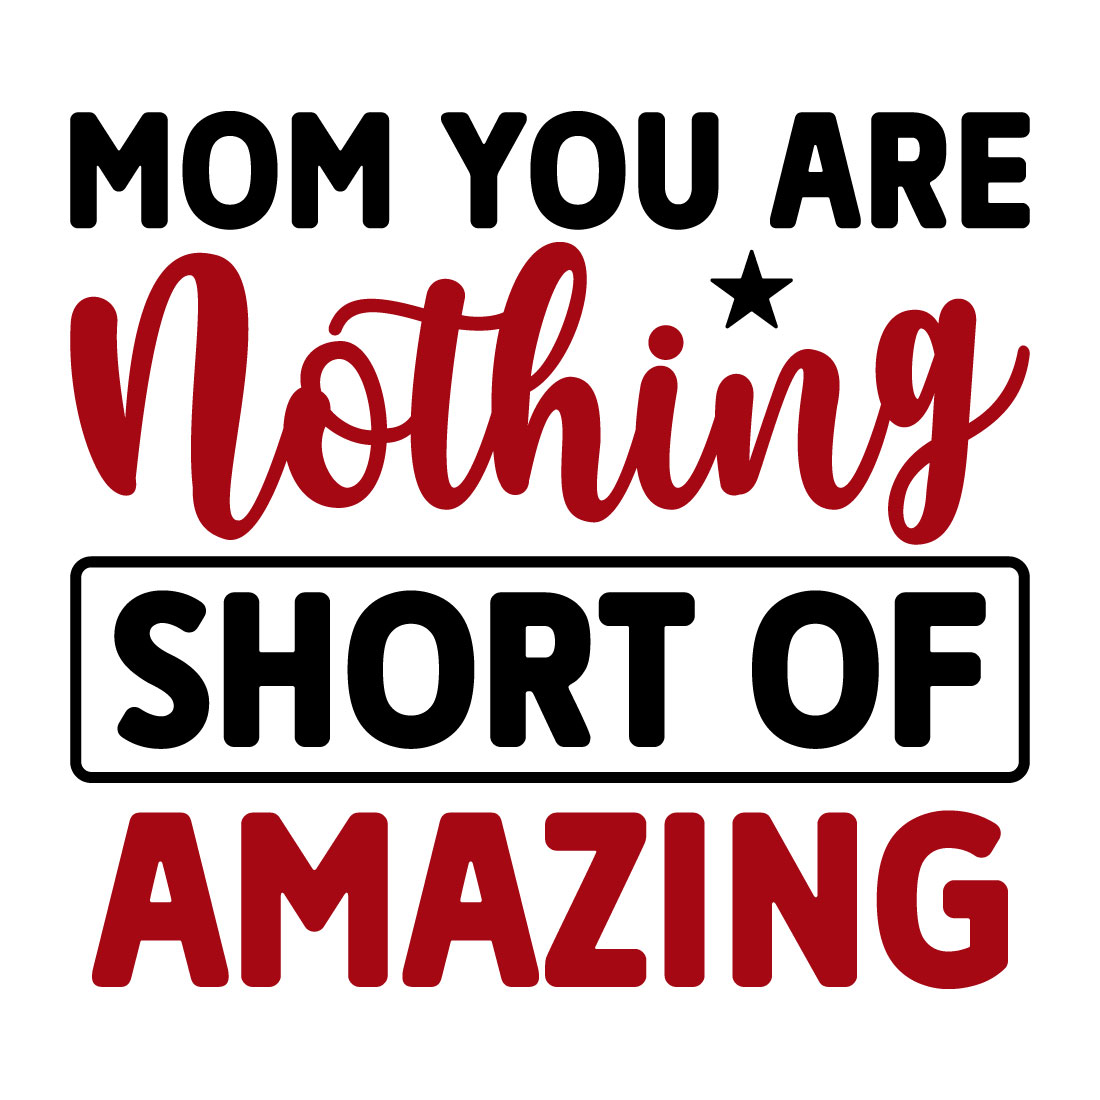 Image for prints with an irresistible inscription Mom You Are Nothing Short Of Amazing